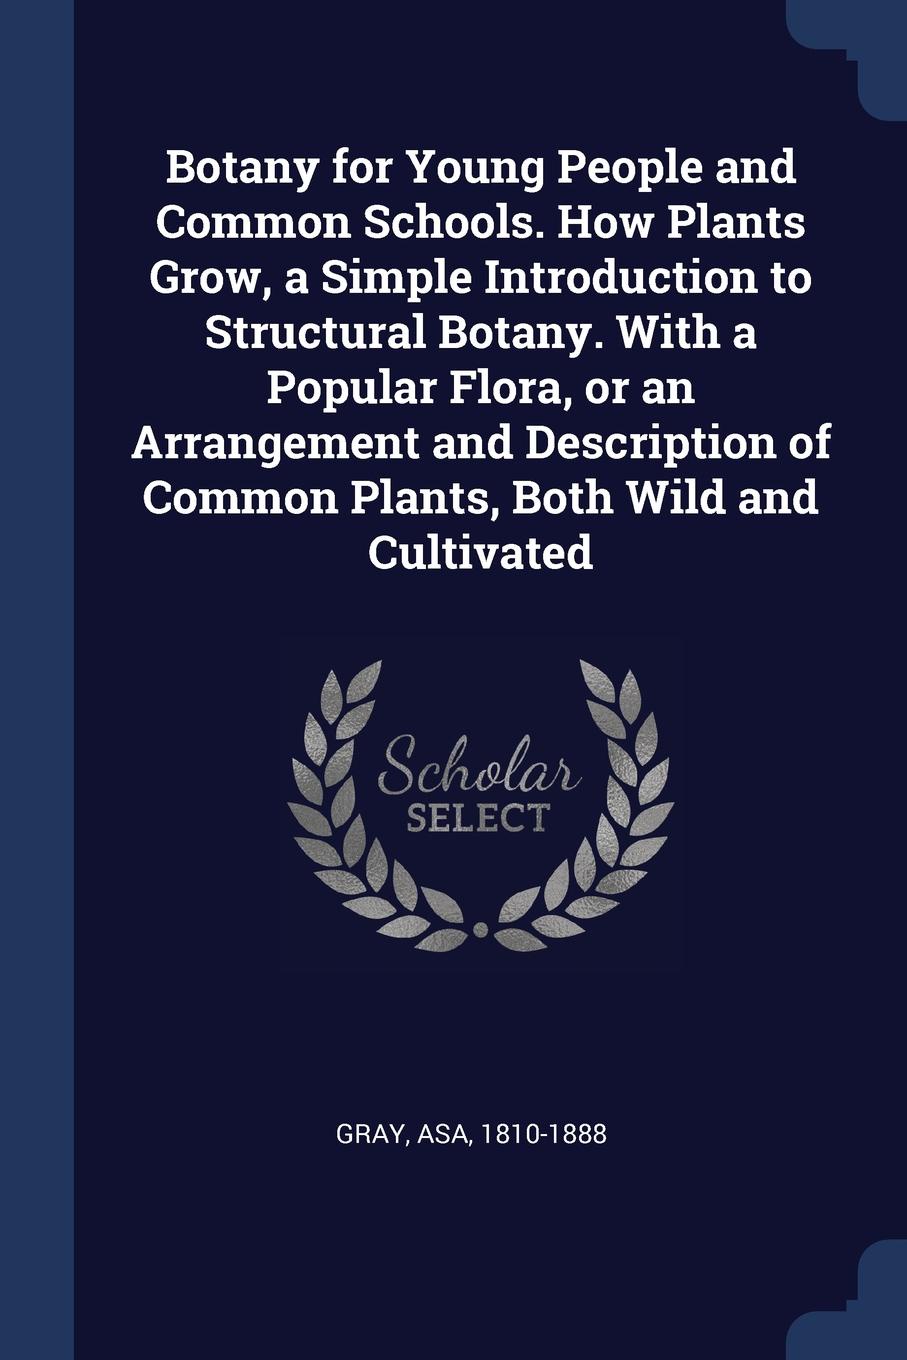 Botany for Young People and Common Schools. How Plants Grow, a Simple Introduction to Structural Botany. With a Popular Flora, or an Arrangement and Description of Common Plants, Both Wild and Cultivated